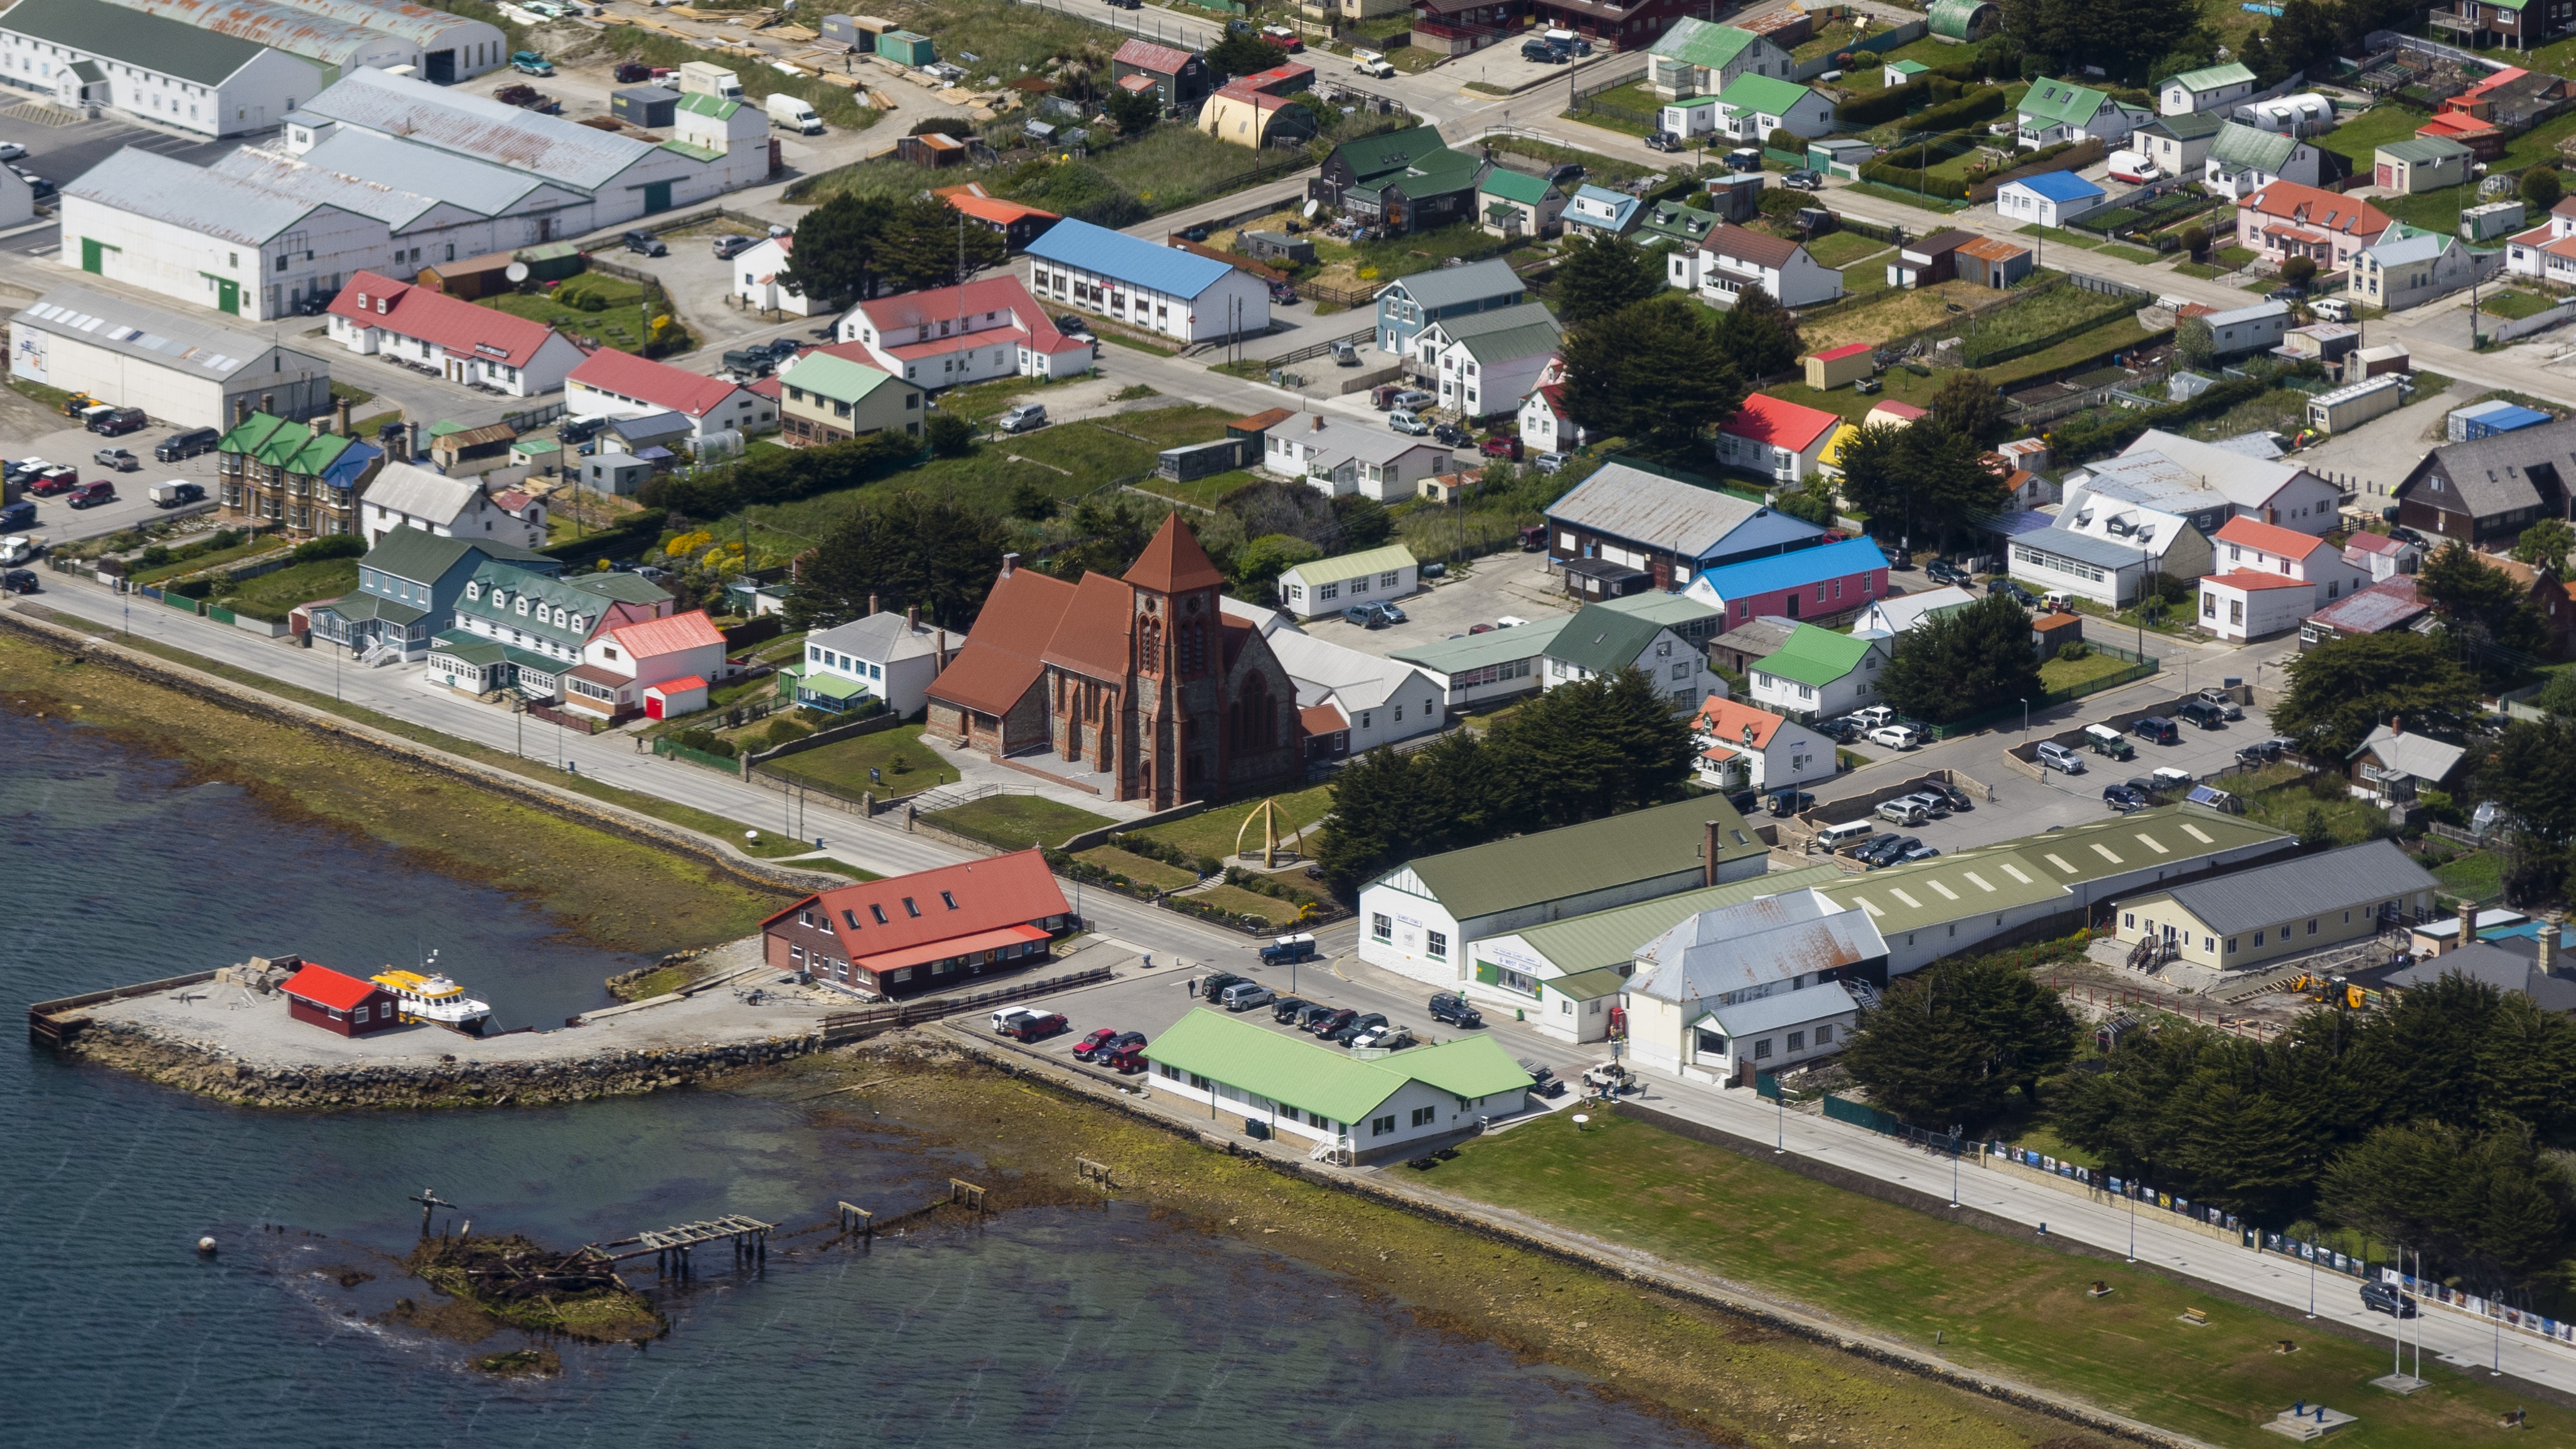 Stanley in the Falkland Islands has won city status